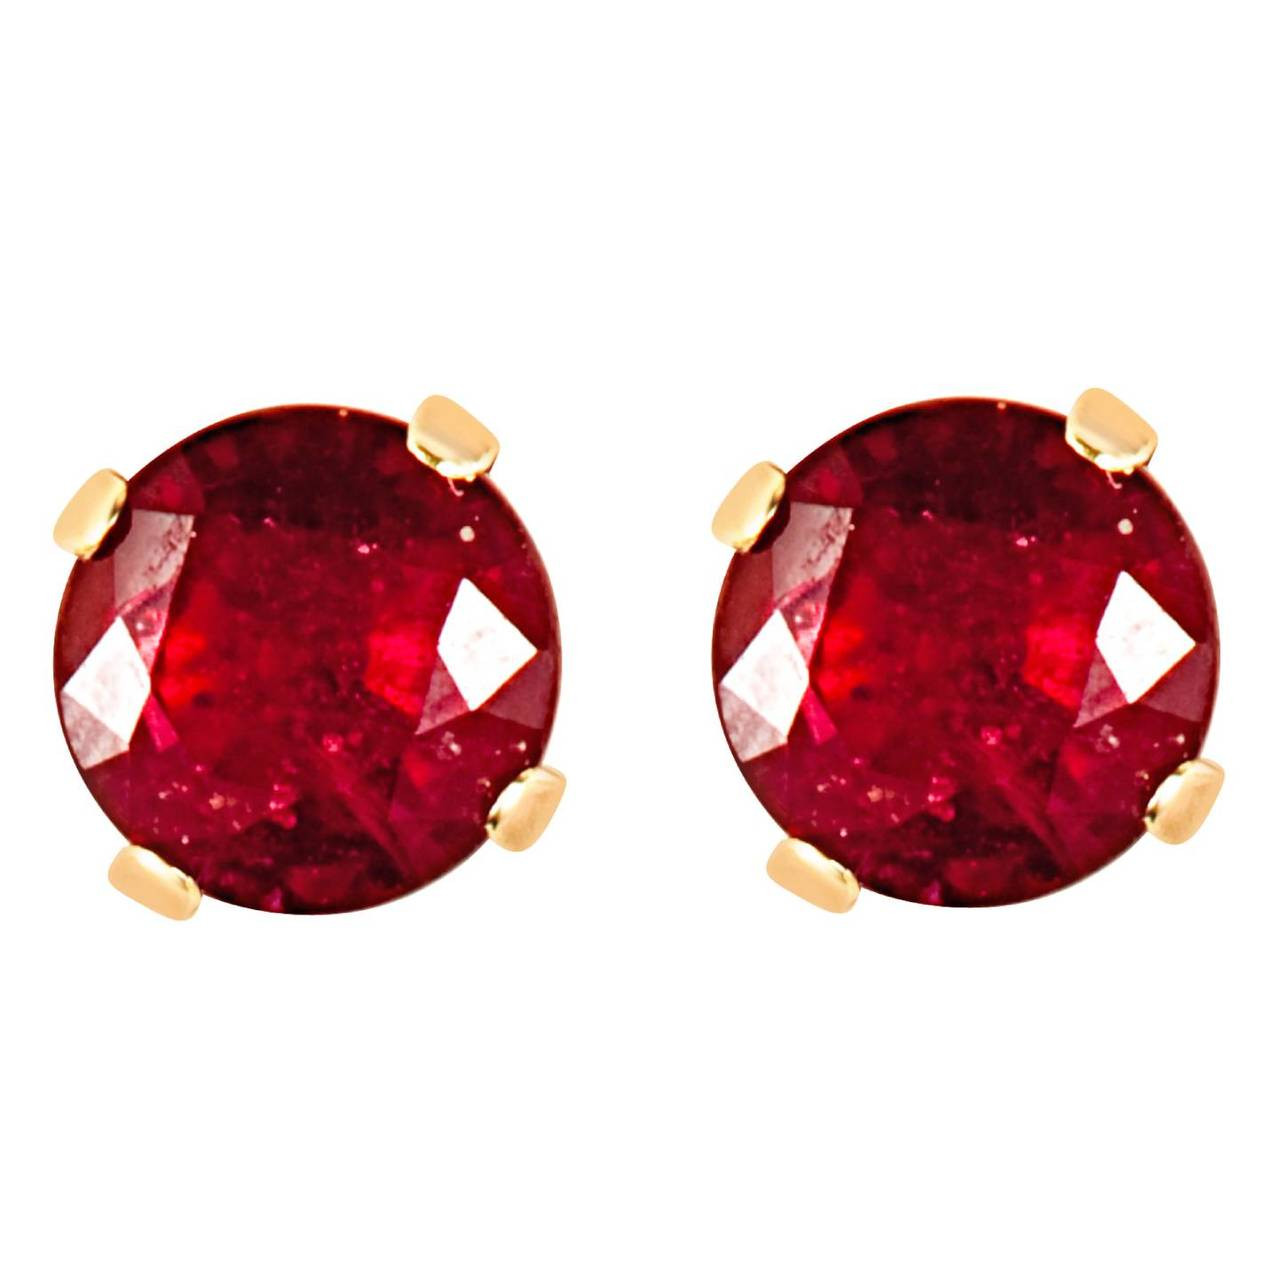 Gemstar Jewellery 18K Yellow Gold Plated Round Cut Red Ruby & Simulated Diamond Halo Stud Earrings